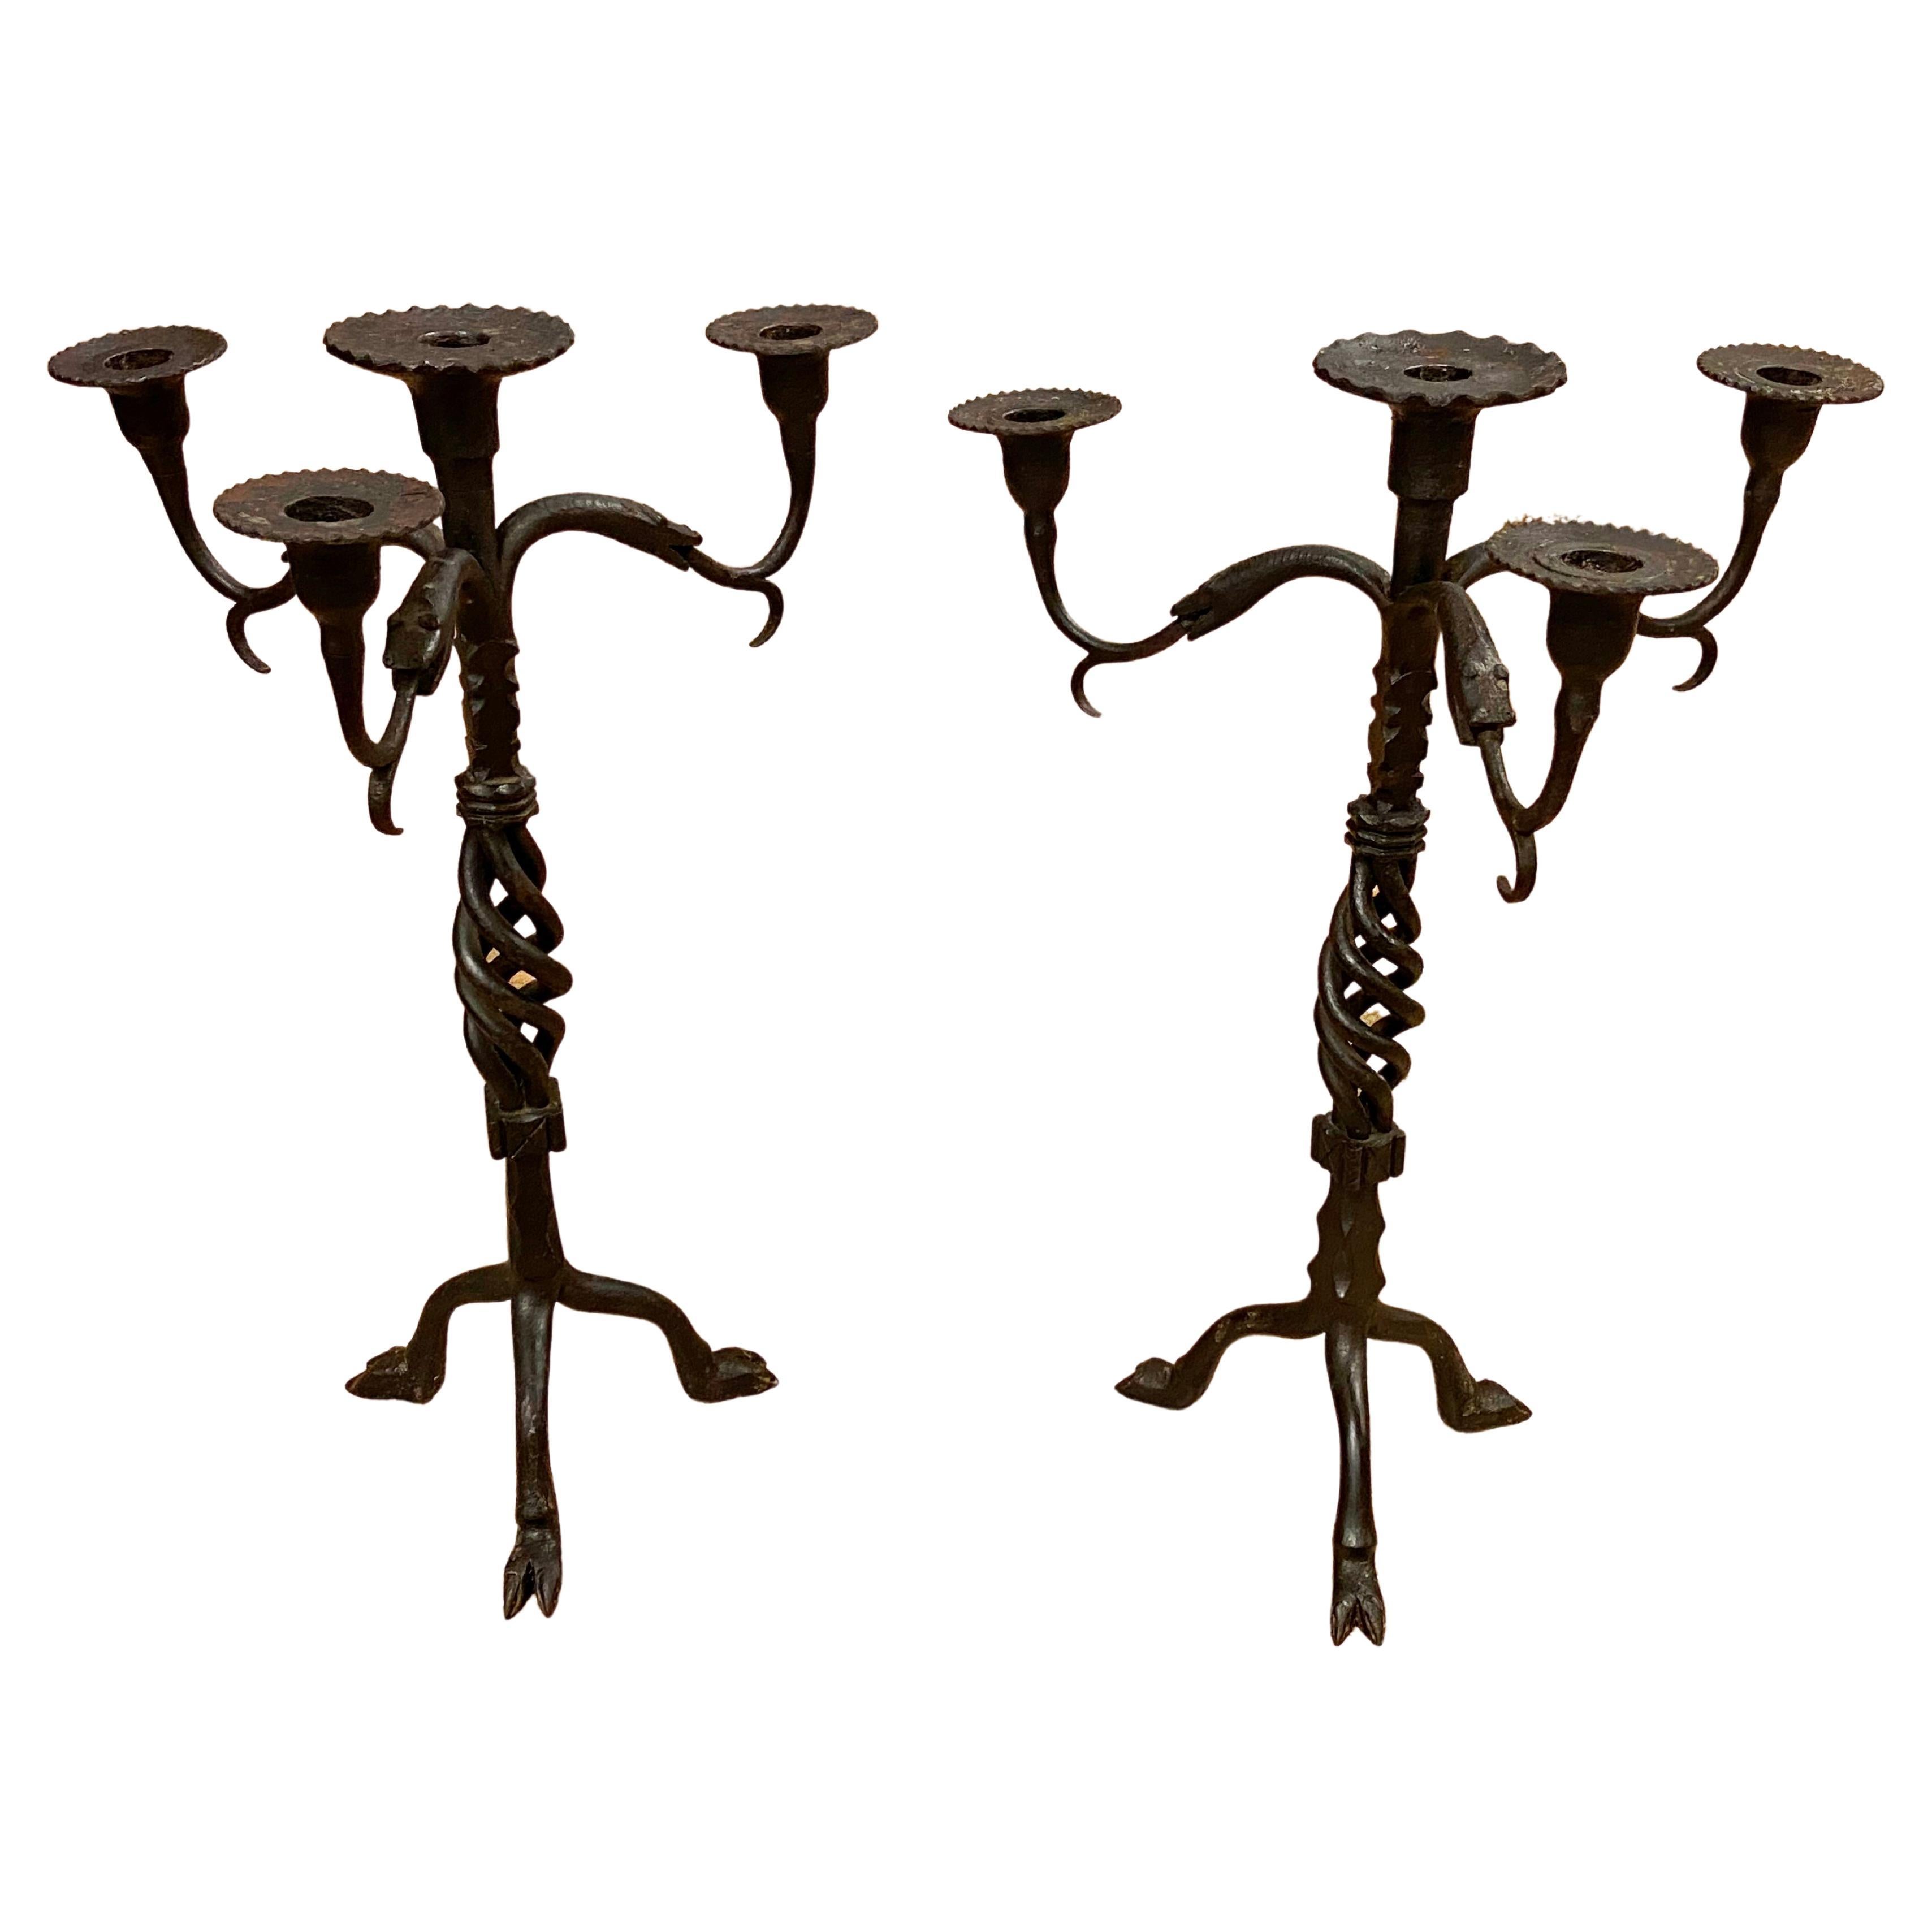 Italian Medieval Revival Wrought Iron Candelabras For Sale